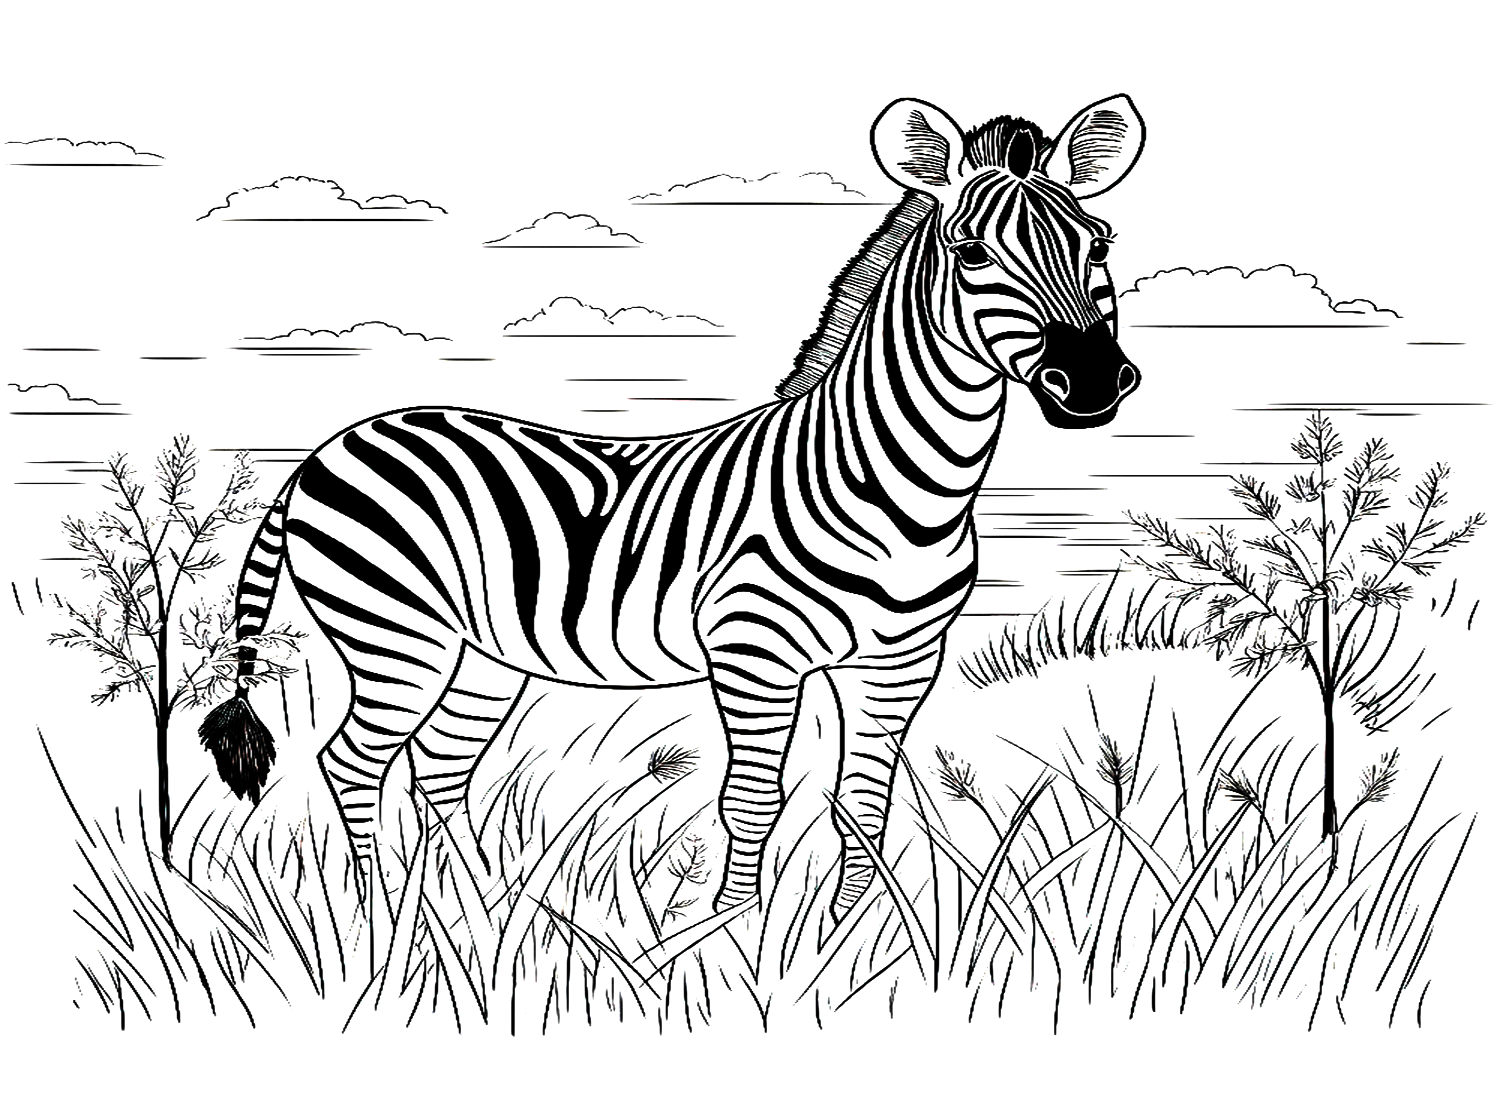 Zebra Coloring Pages For Adults